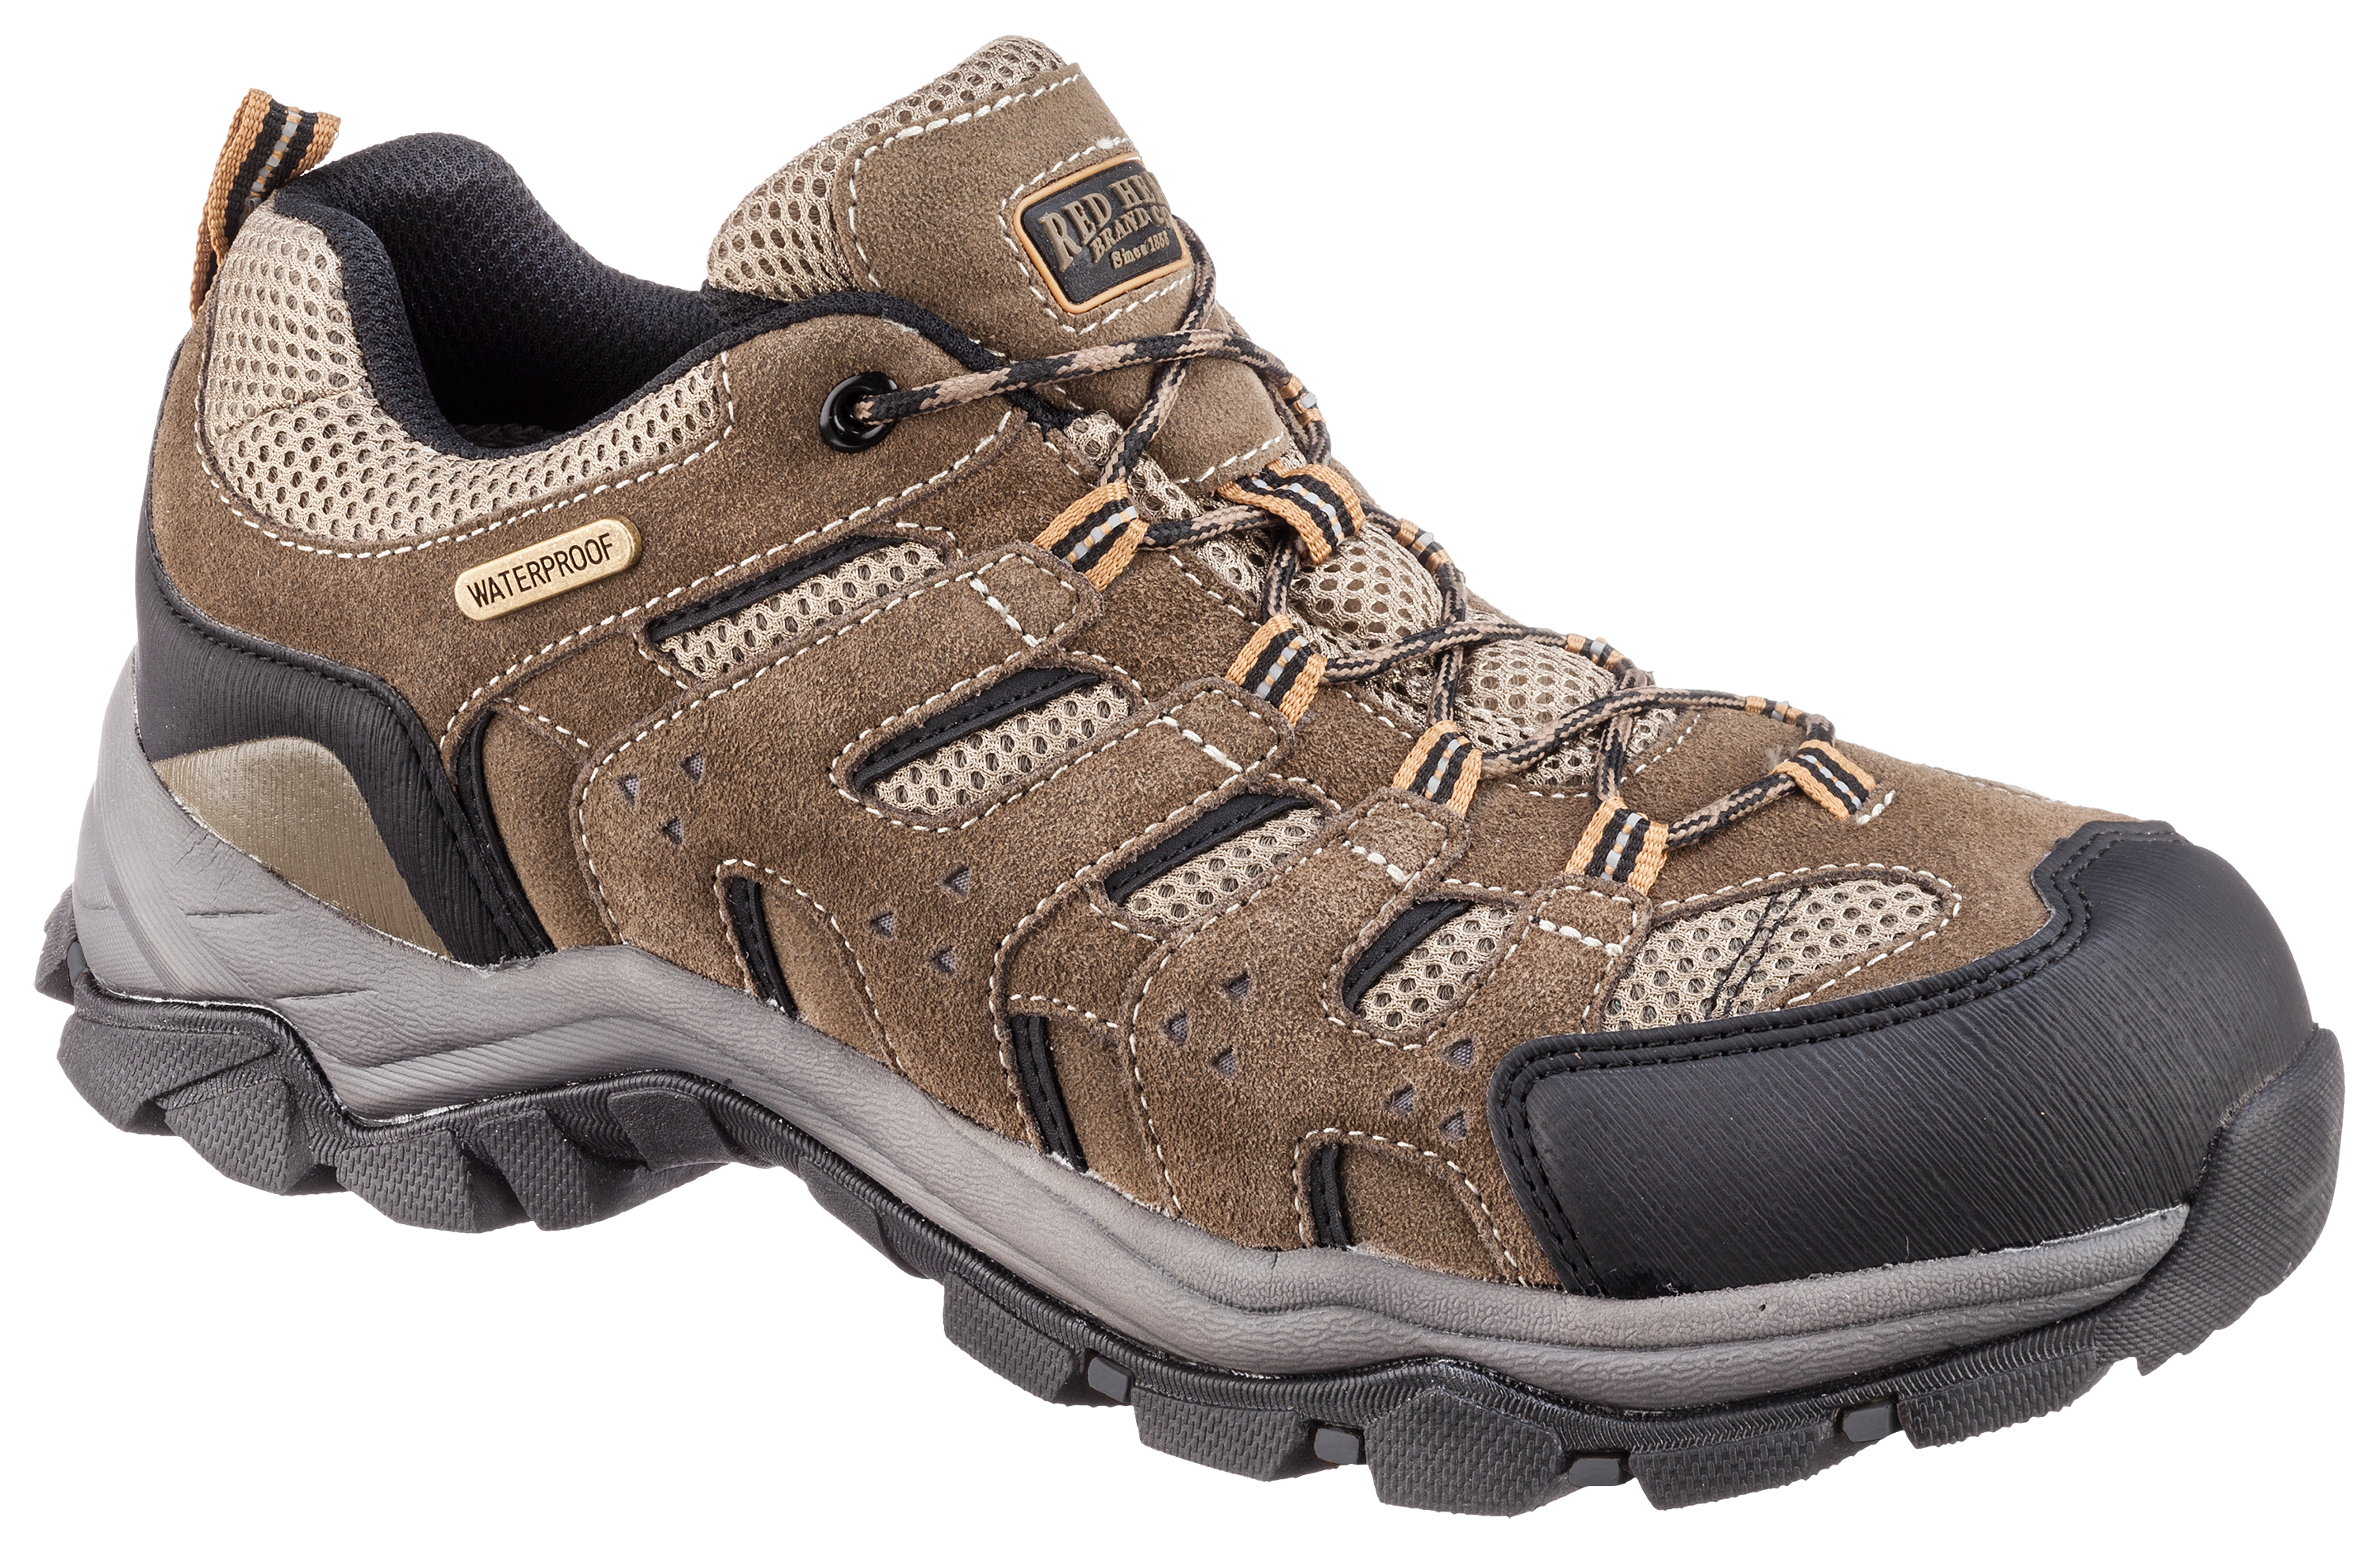 RedHead Overland Low Waterproof Hiking Boots for Men | Bass Pro Shops